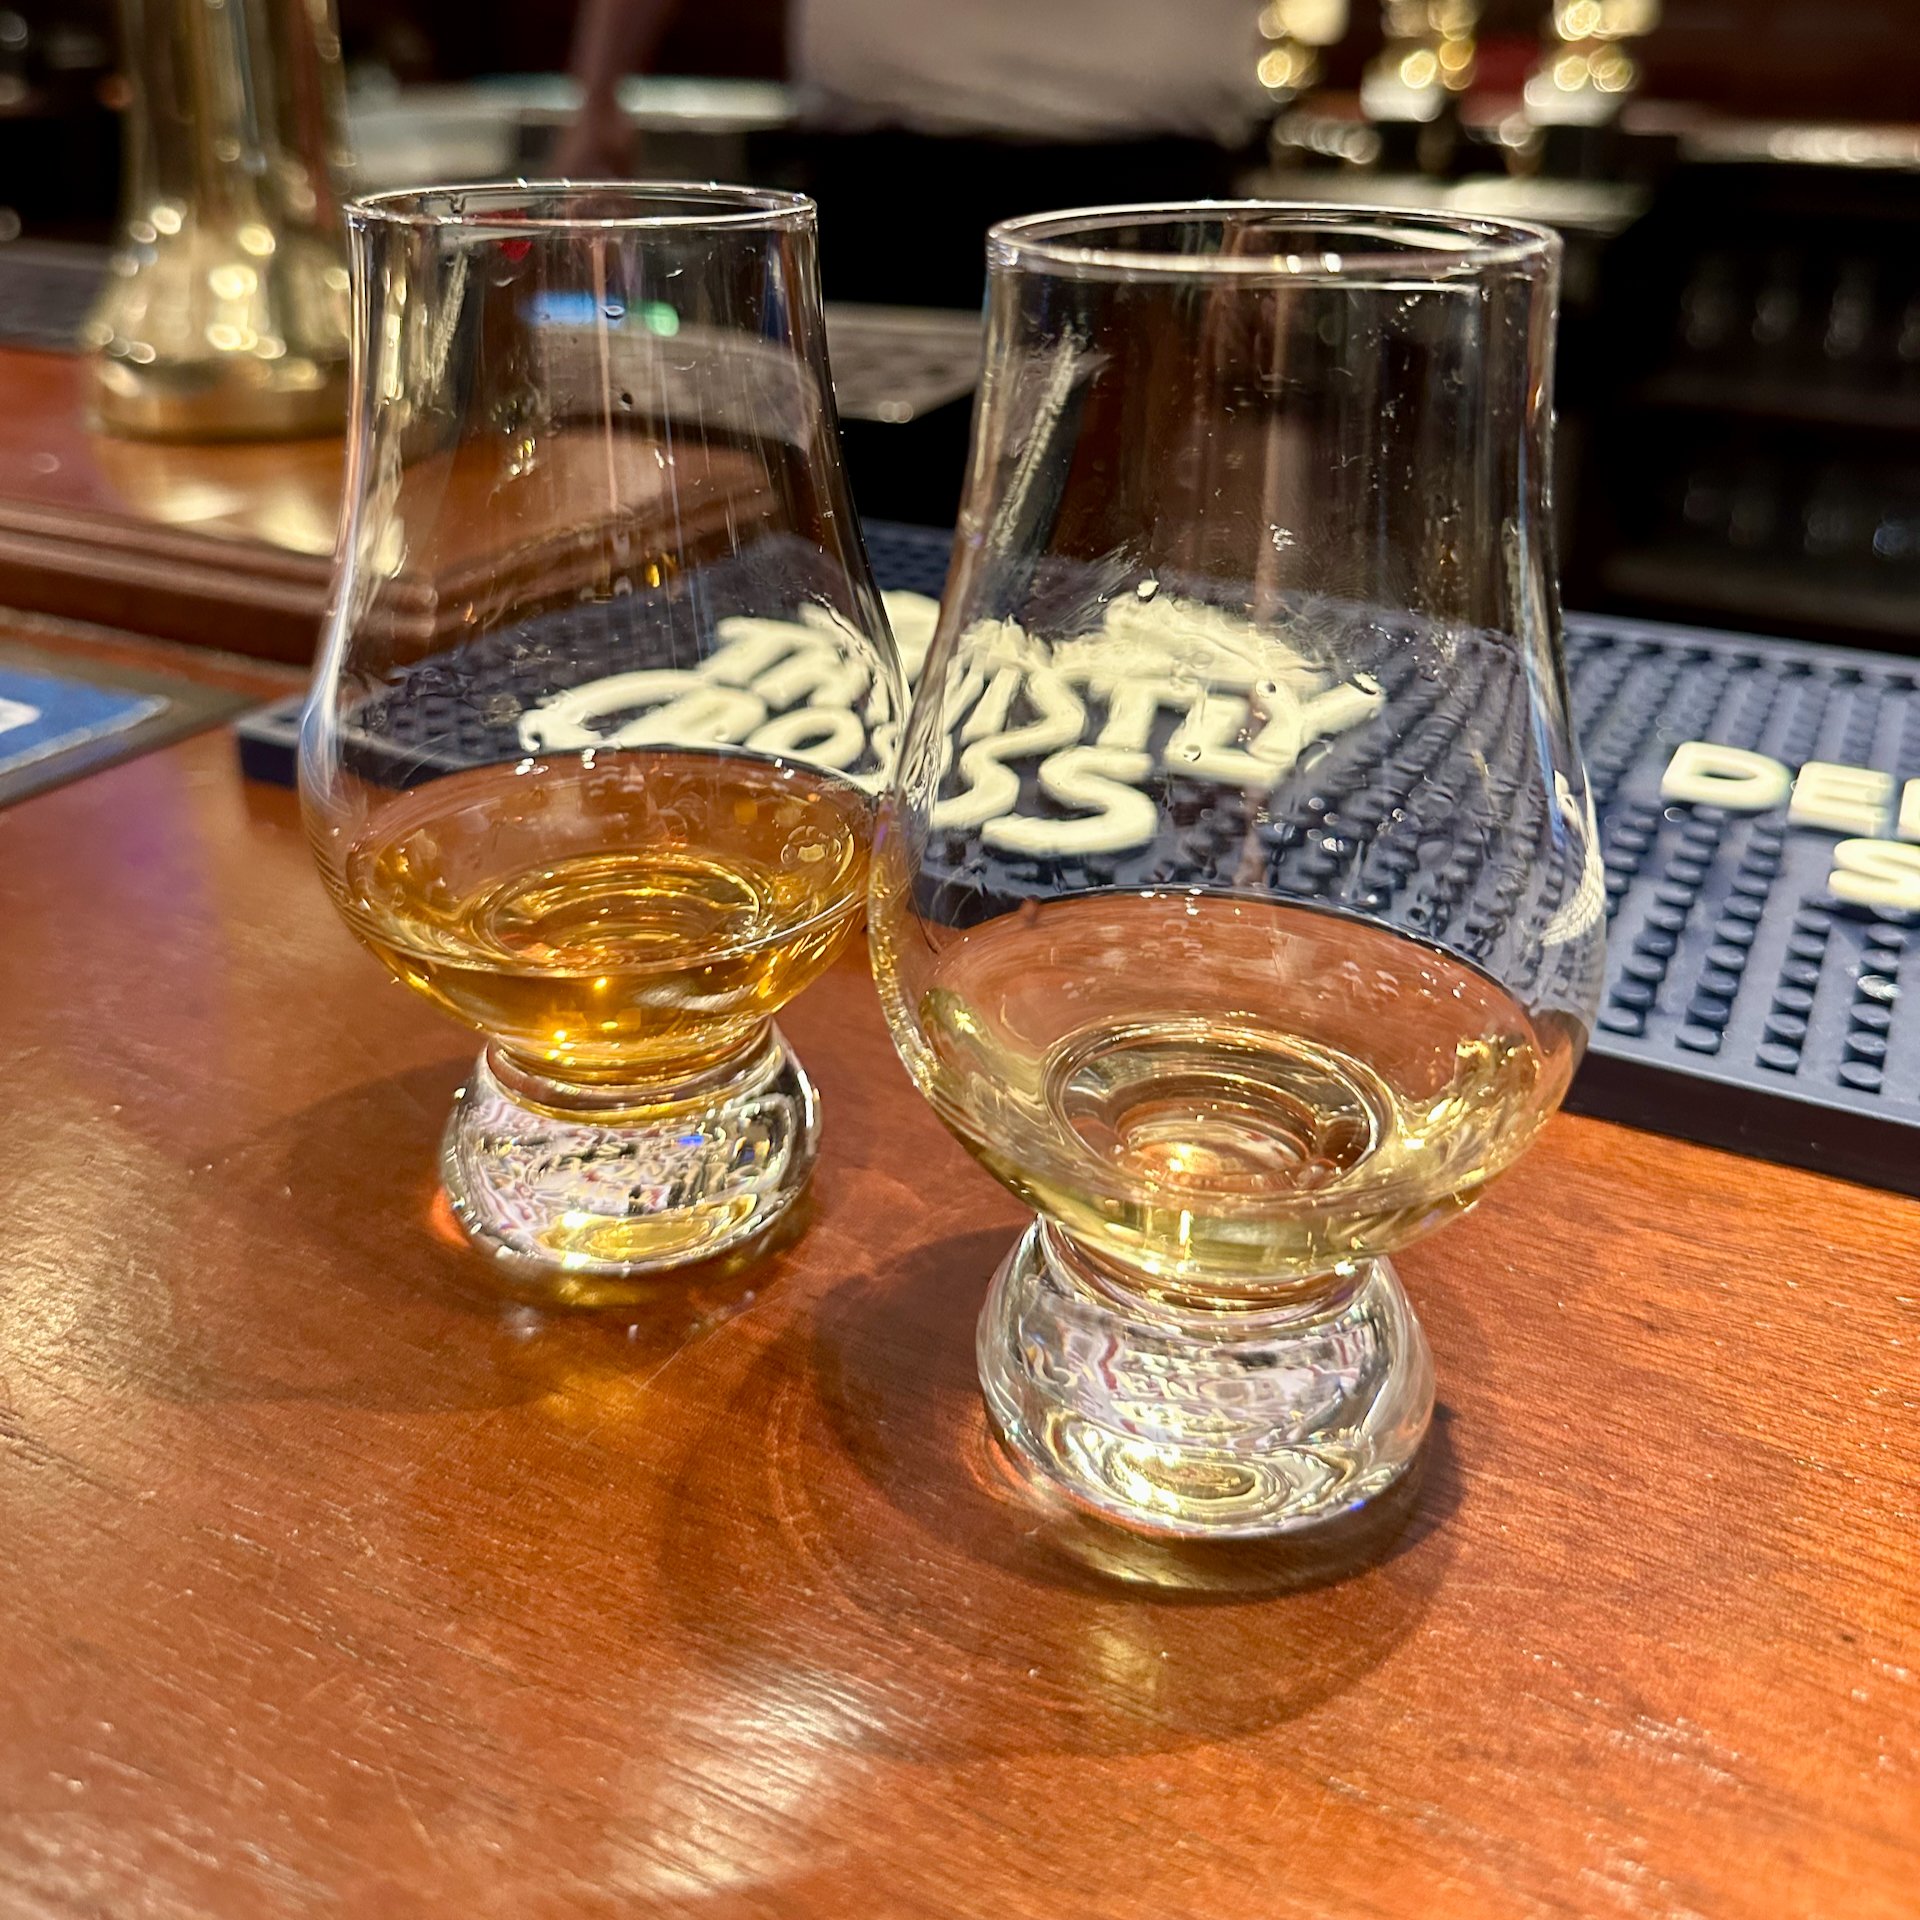  We ended the night in Edinburgh with a couple of scotches - so appropriate!  